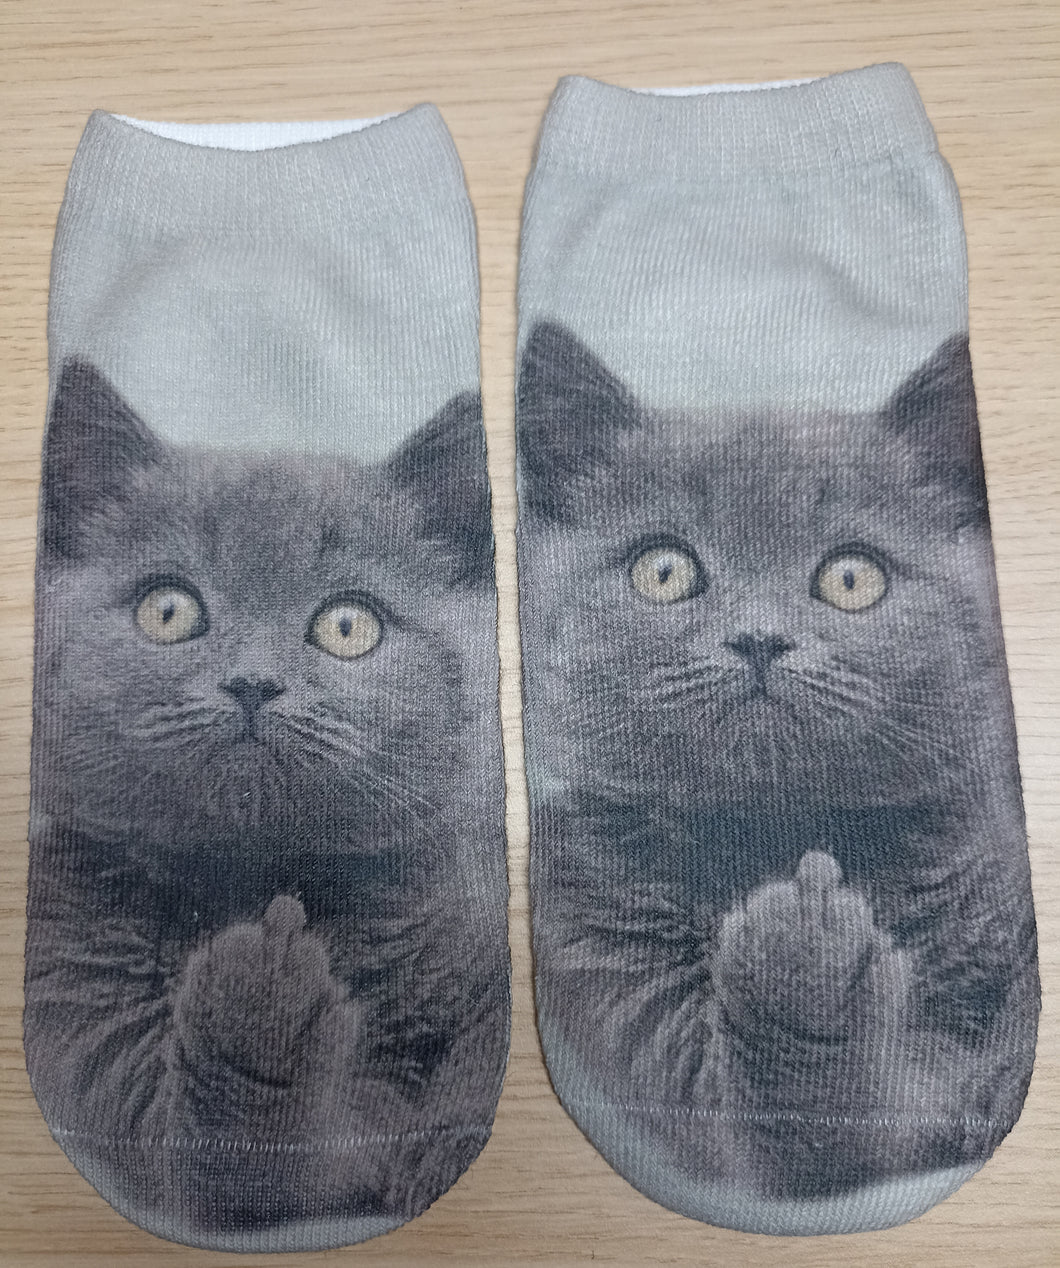 Boo the Cat Ankle Socks